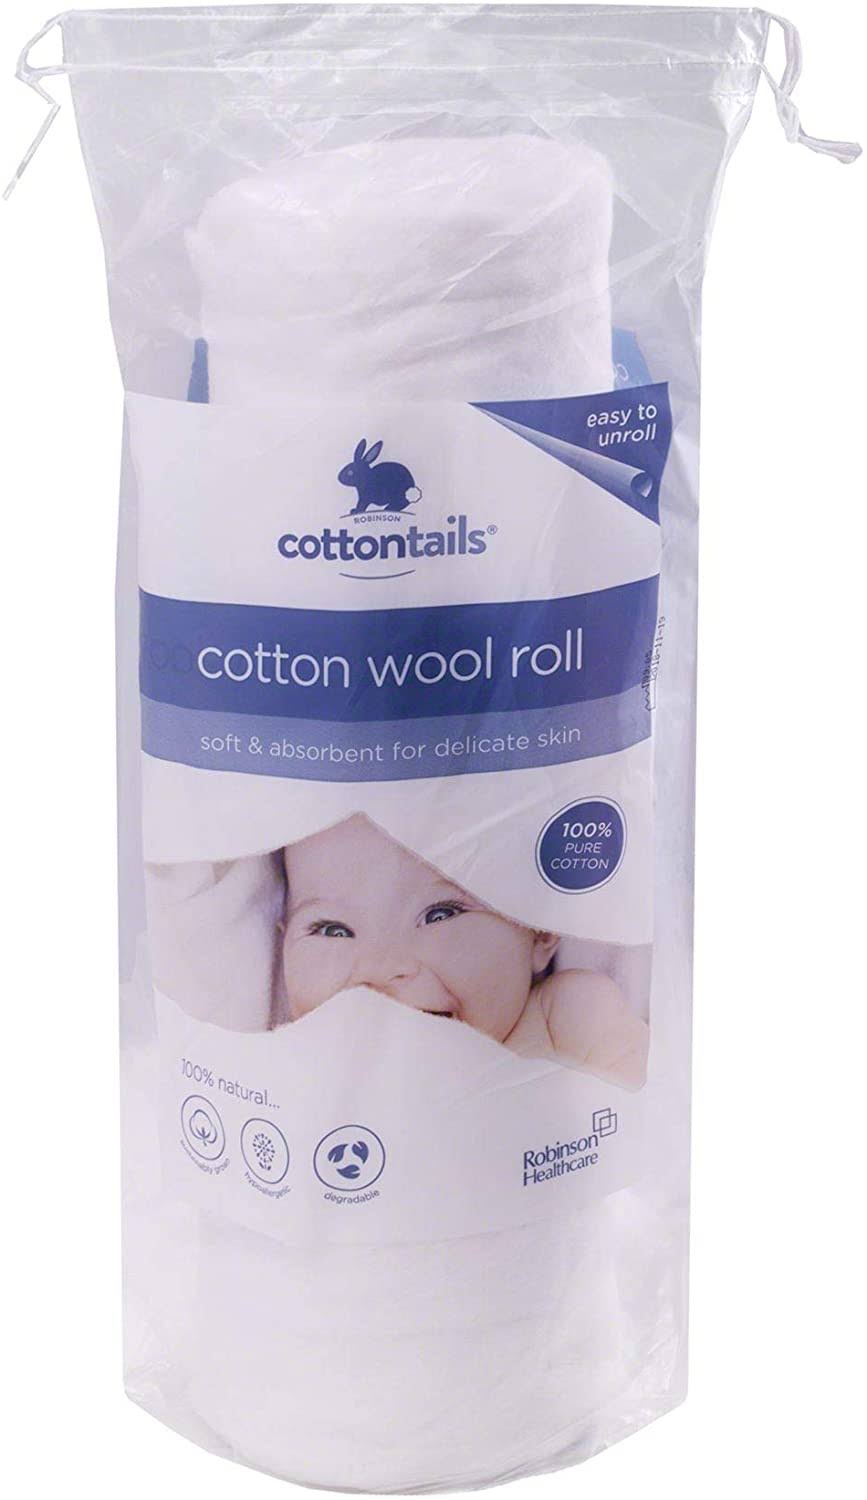 Cottontails Soft Cotton Wool Roll - 300g